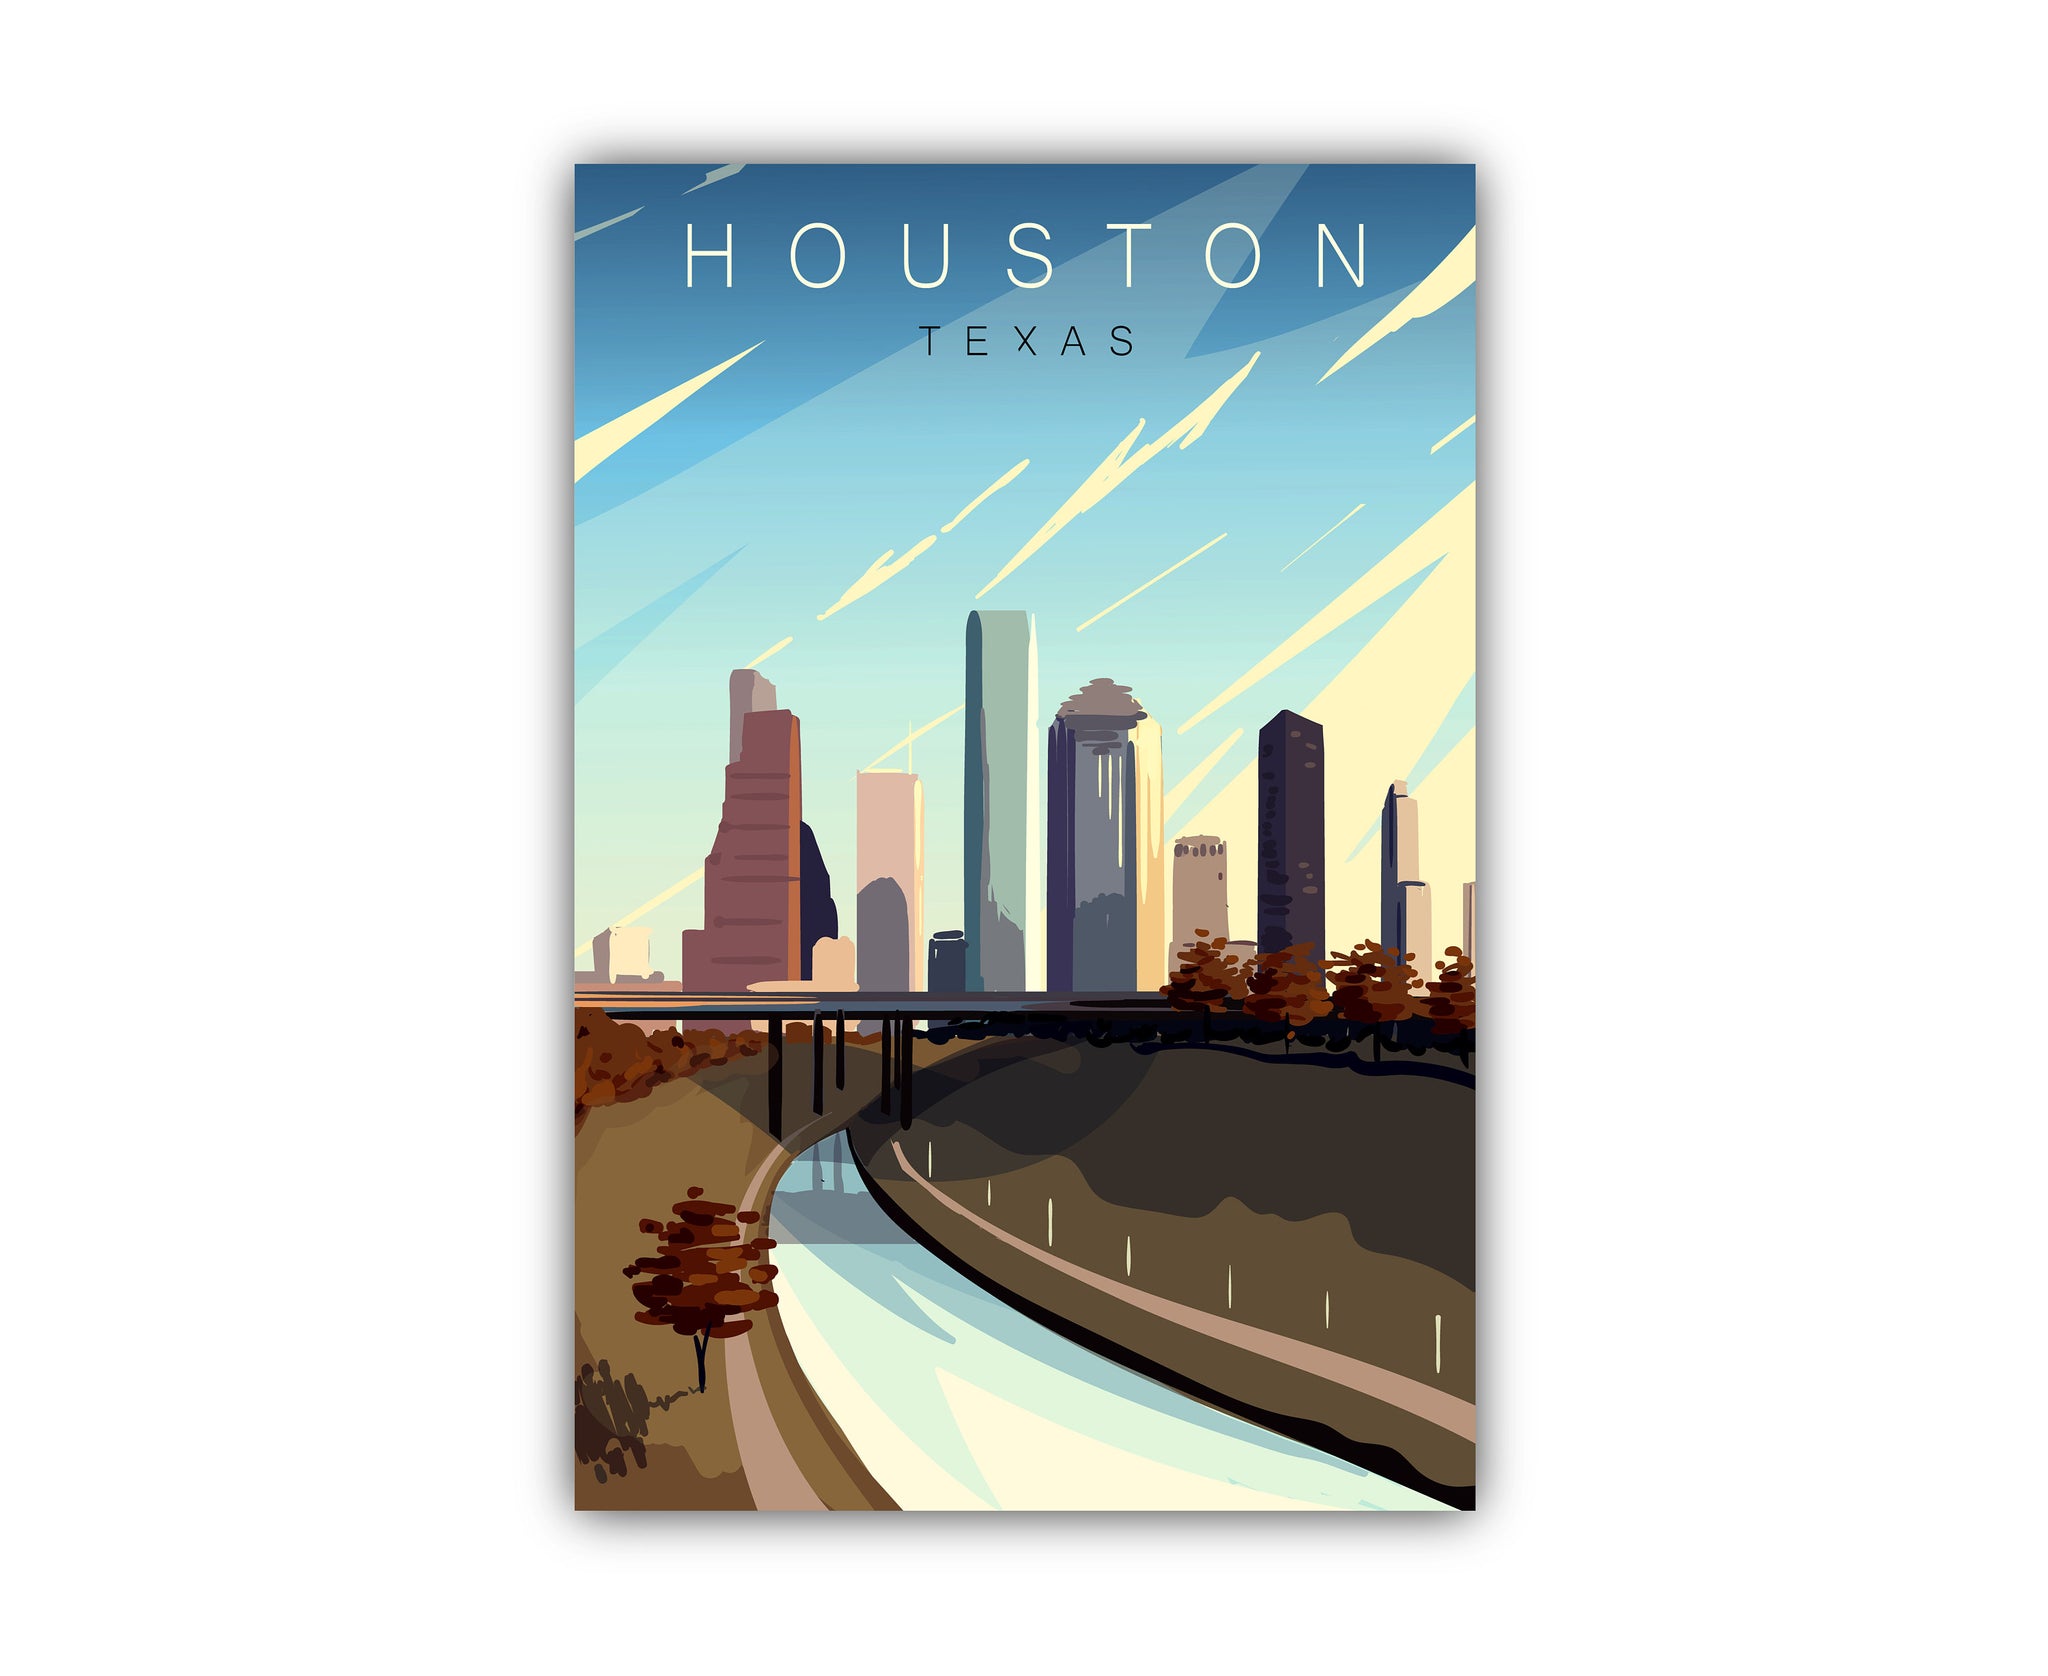 Retro Style Travel Poster, Texas Vintage Rustic Poster Print, Home Wall Art, Office Wall Decor, Posters, Houston, State Map Poster, Houston